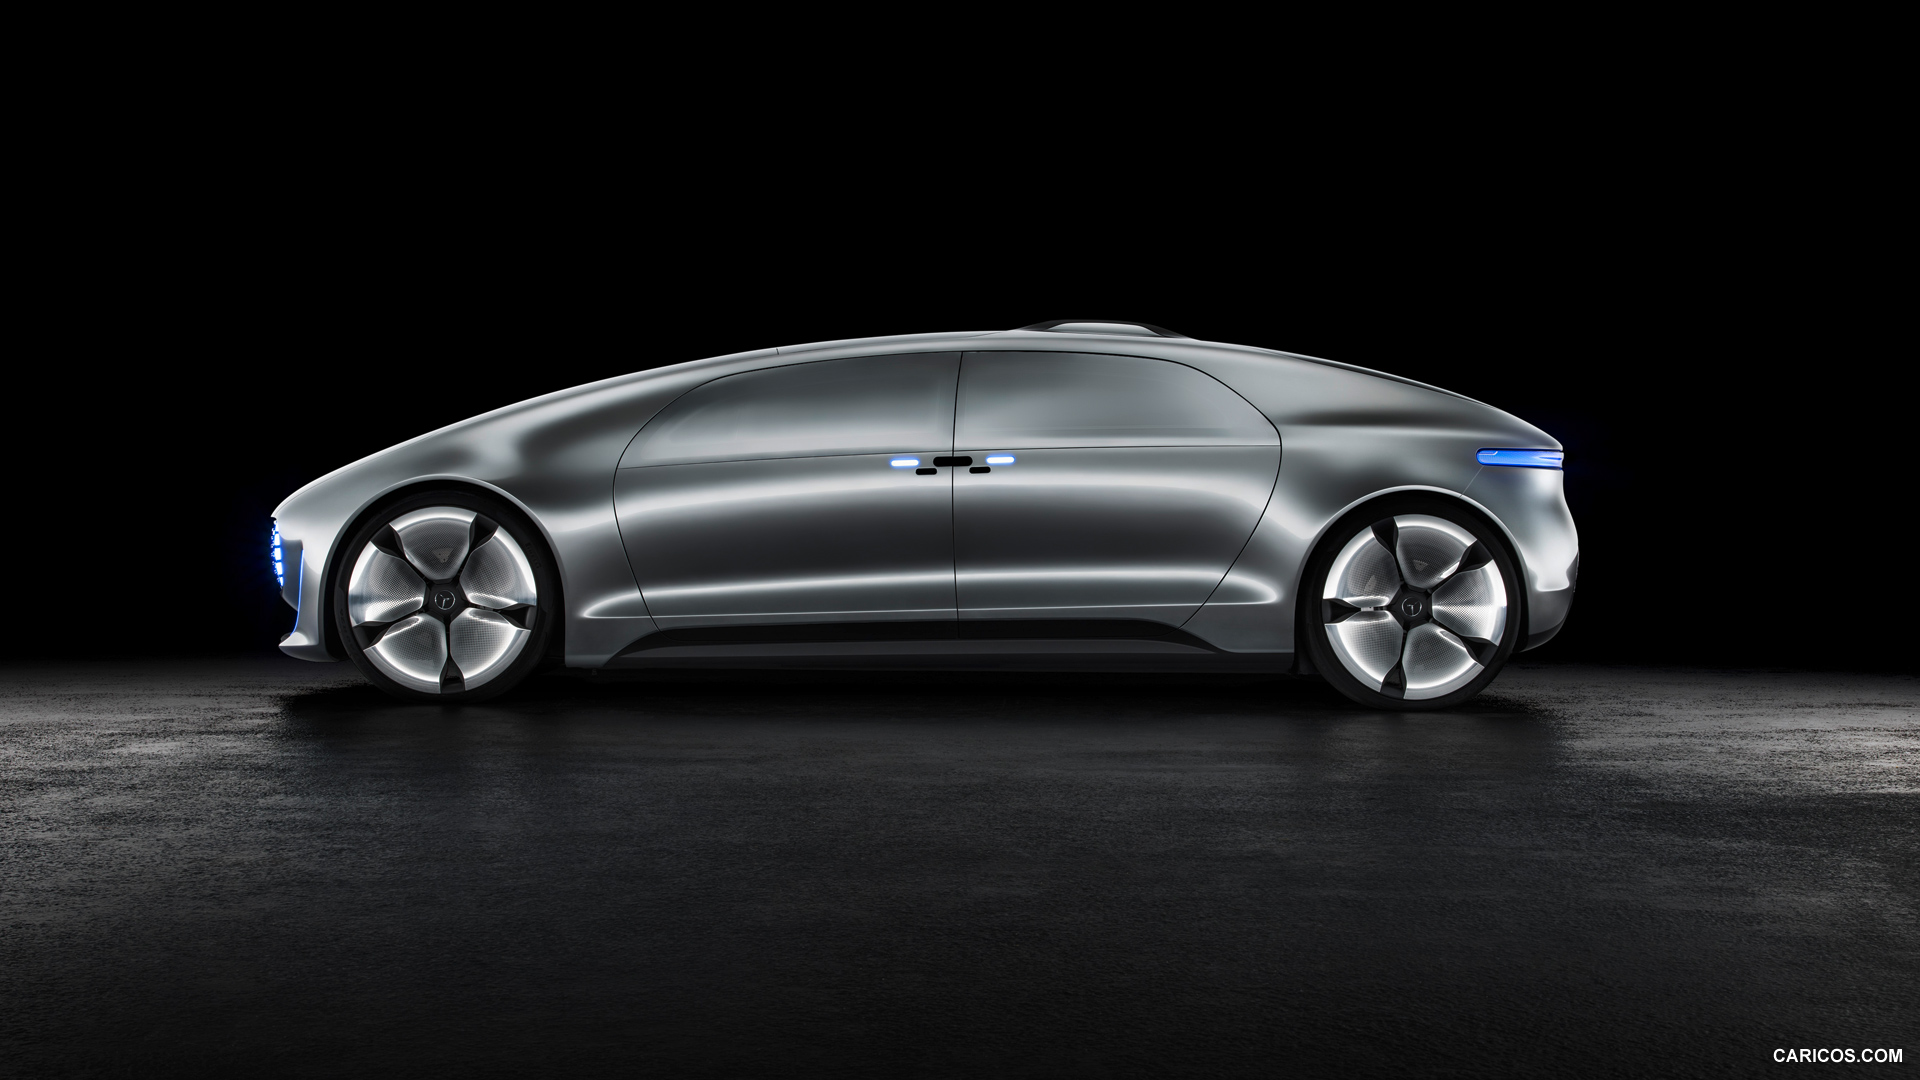 2015 Mercedes-Benz F 015 Luxury in Motion Concept  - Side, #48 of 92